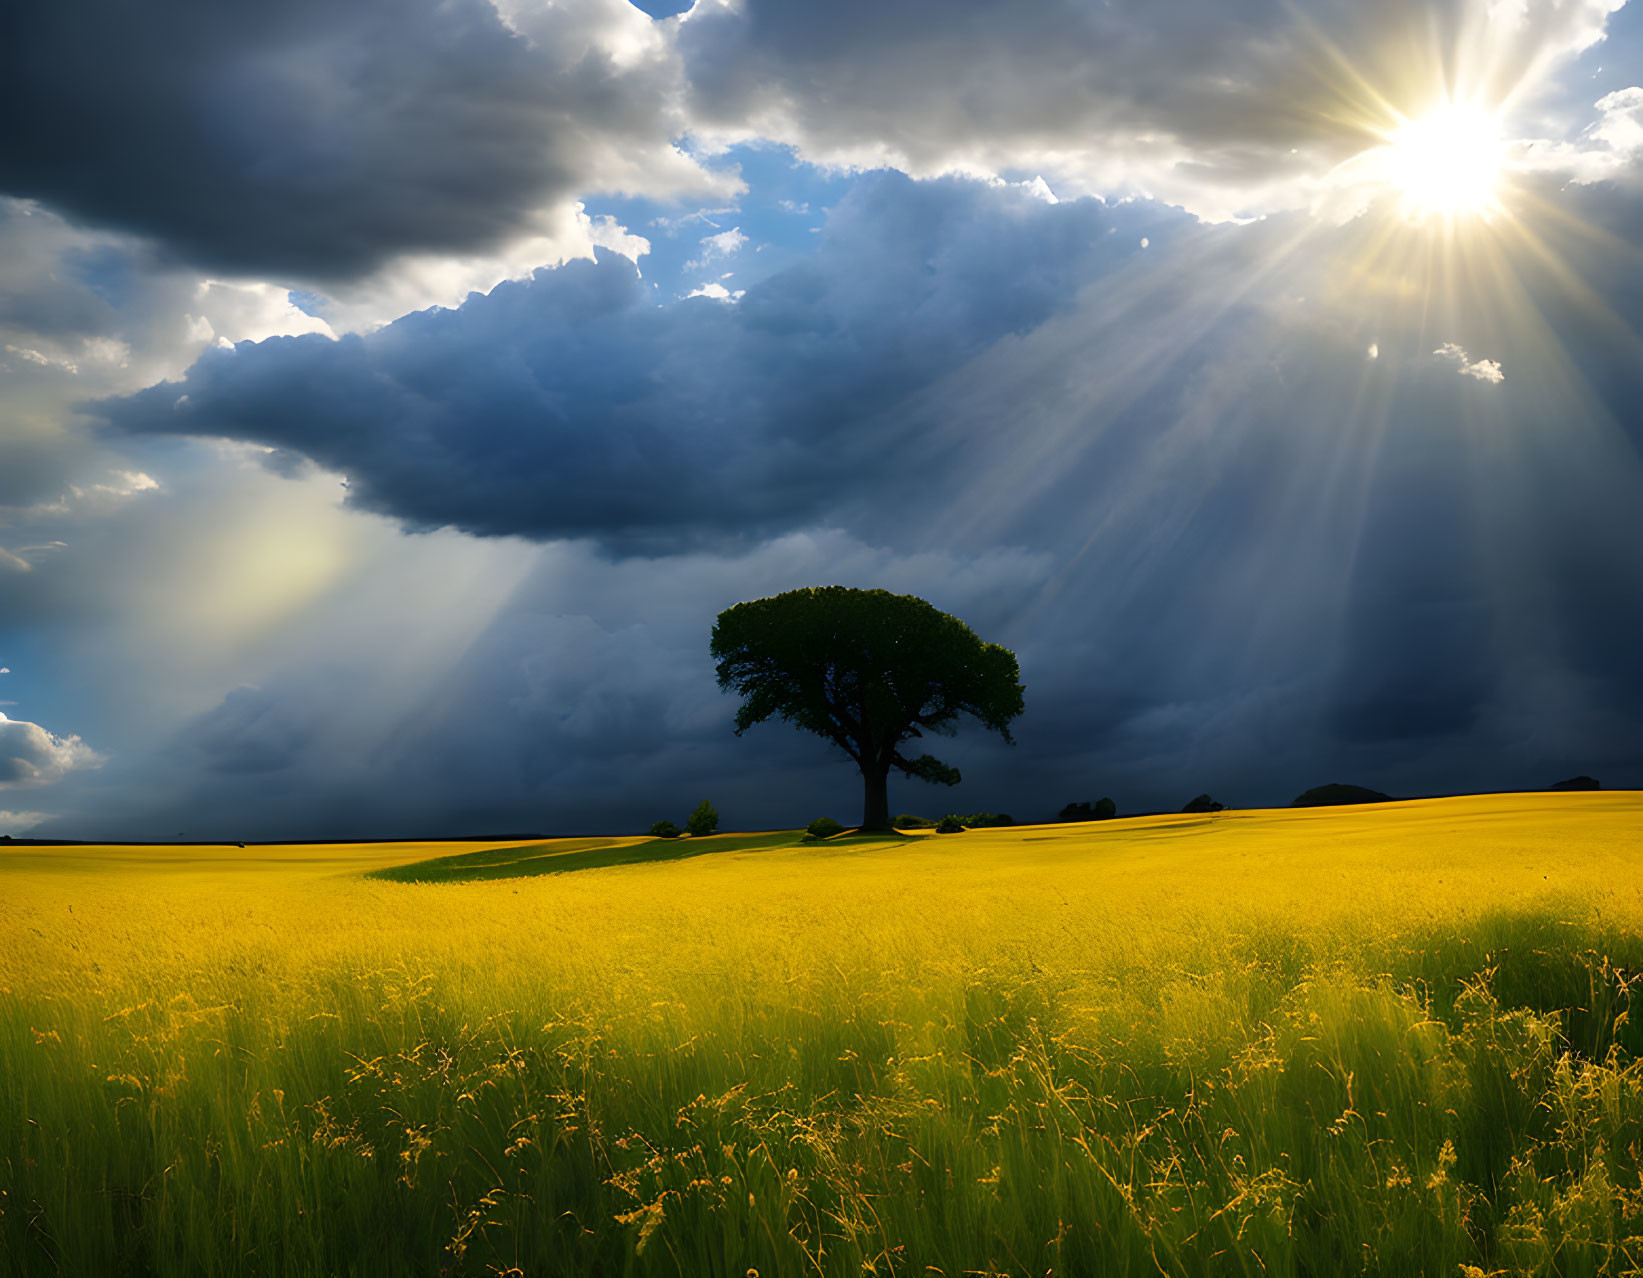 Solitary tree in vibrant yellow field under dramatic sky